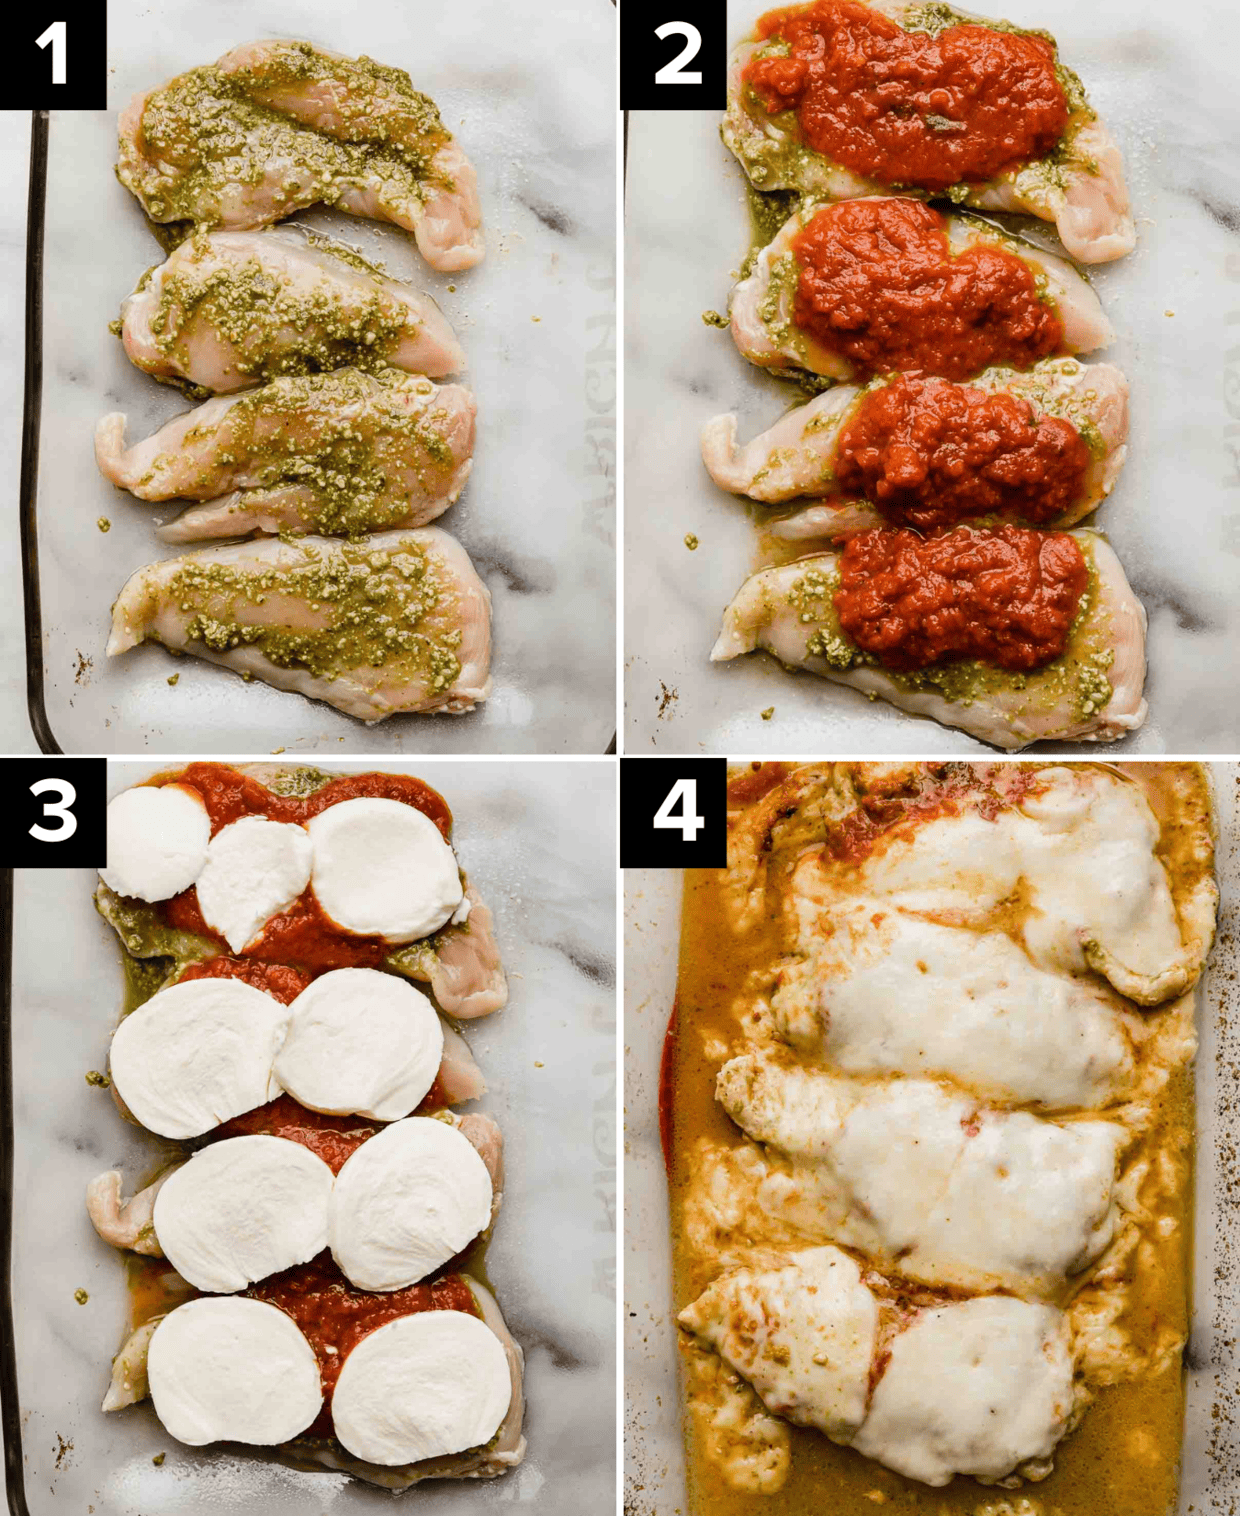 Four images showing how to make easy Pesto Chicken Parmesan in a baking dish; top left is raw chicken topped with basil pesto, top right is chicken topped with marinara, bottom left has mozzarella topped chicken, bottom right is baked Pesto Chicken Parmesan in a baking dish.